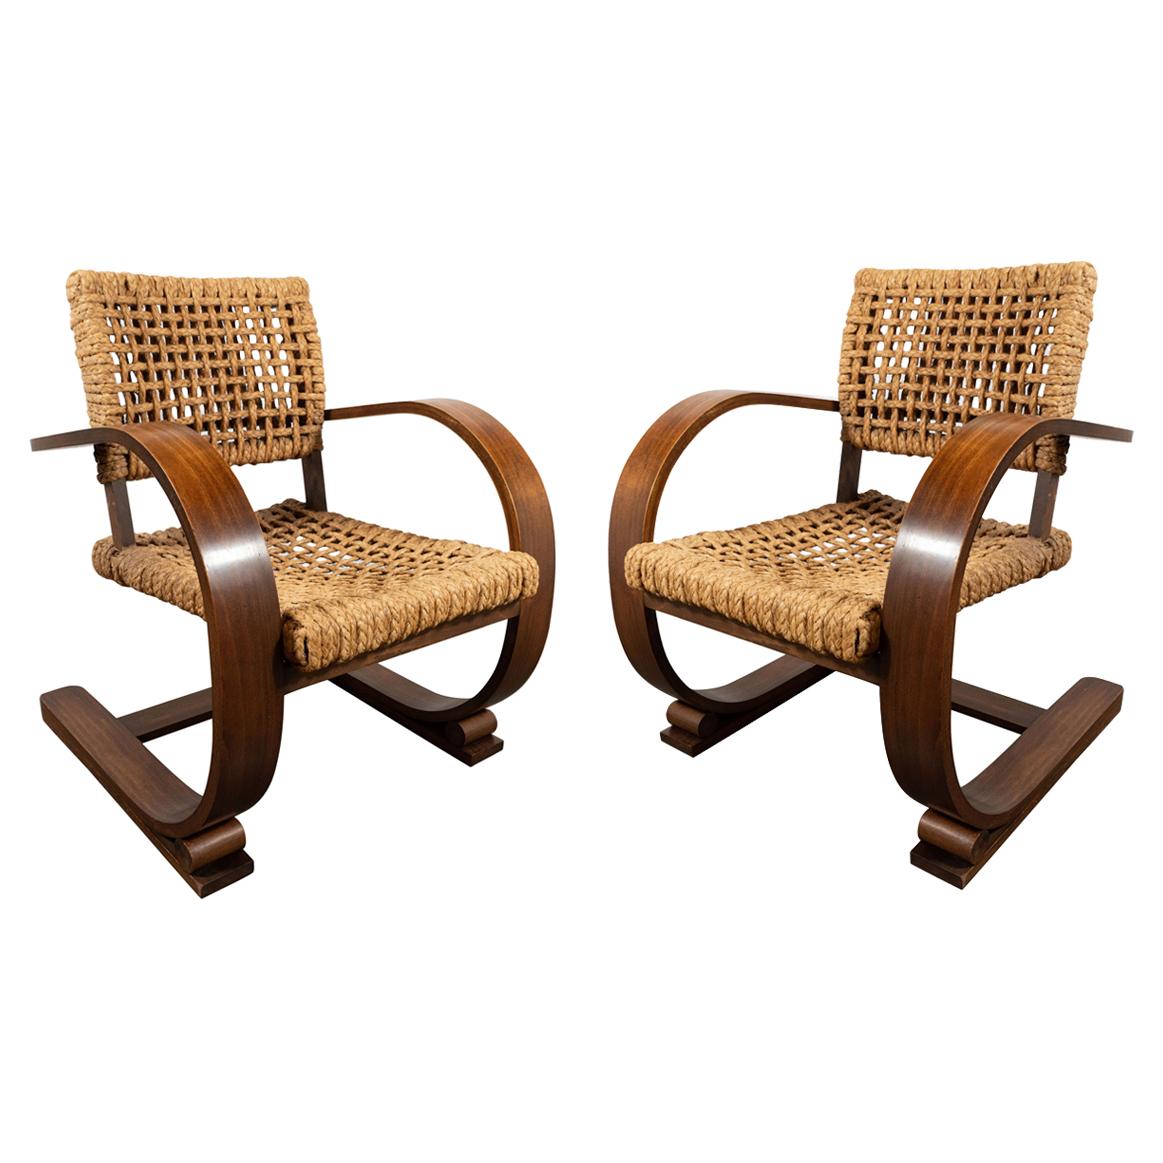 Pair of Art Deco Streamlined Walnut and Rope "Halabala" Chairs by Audoux-Minet